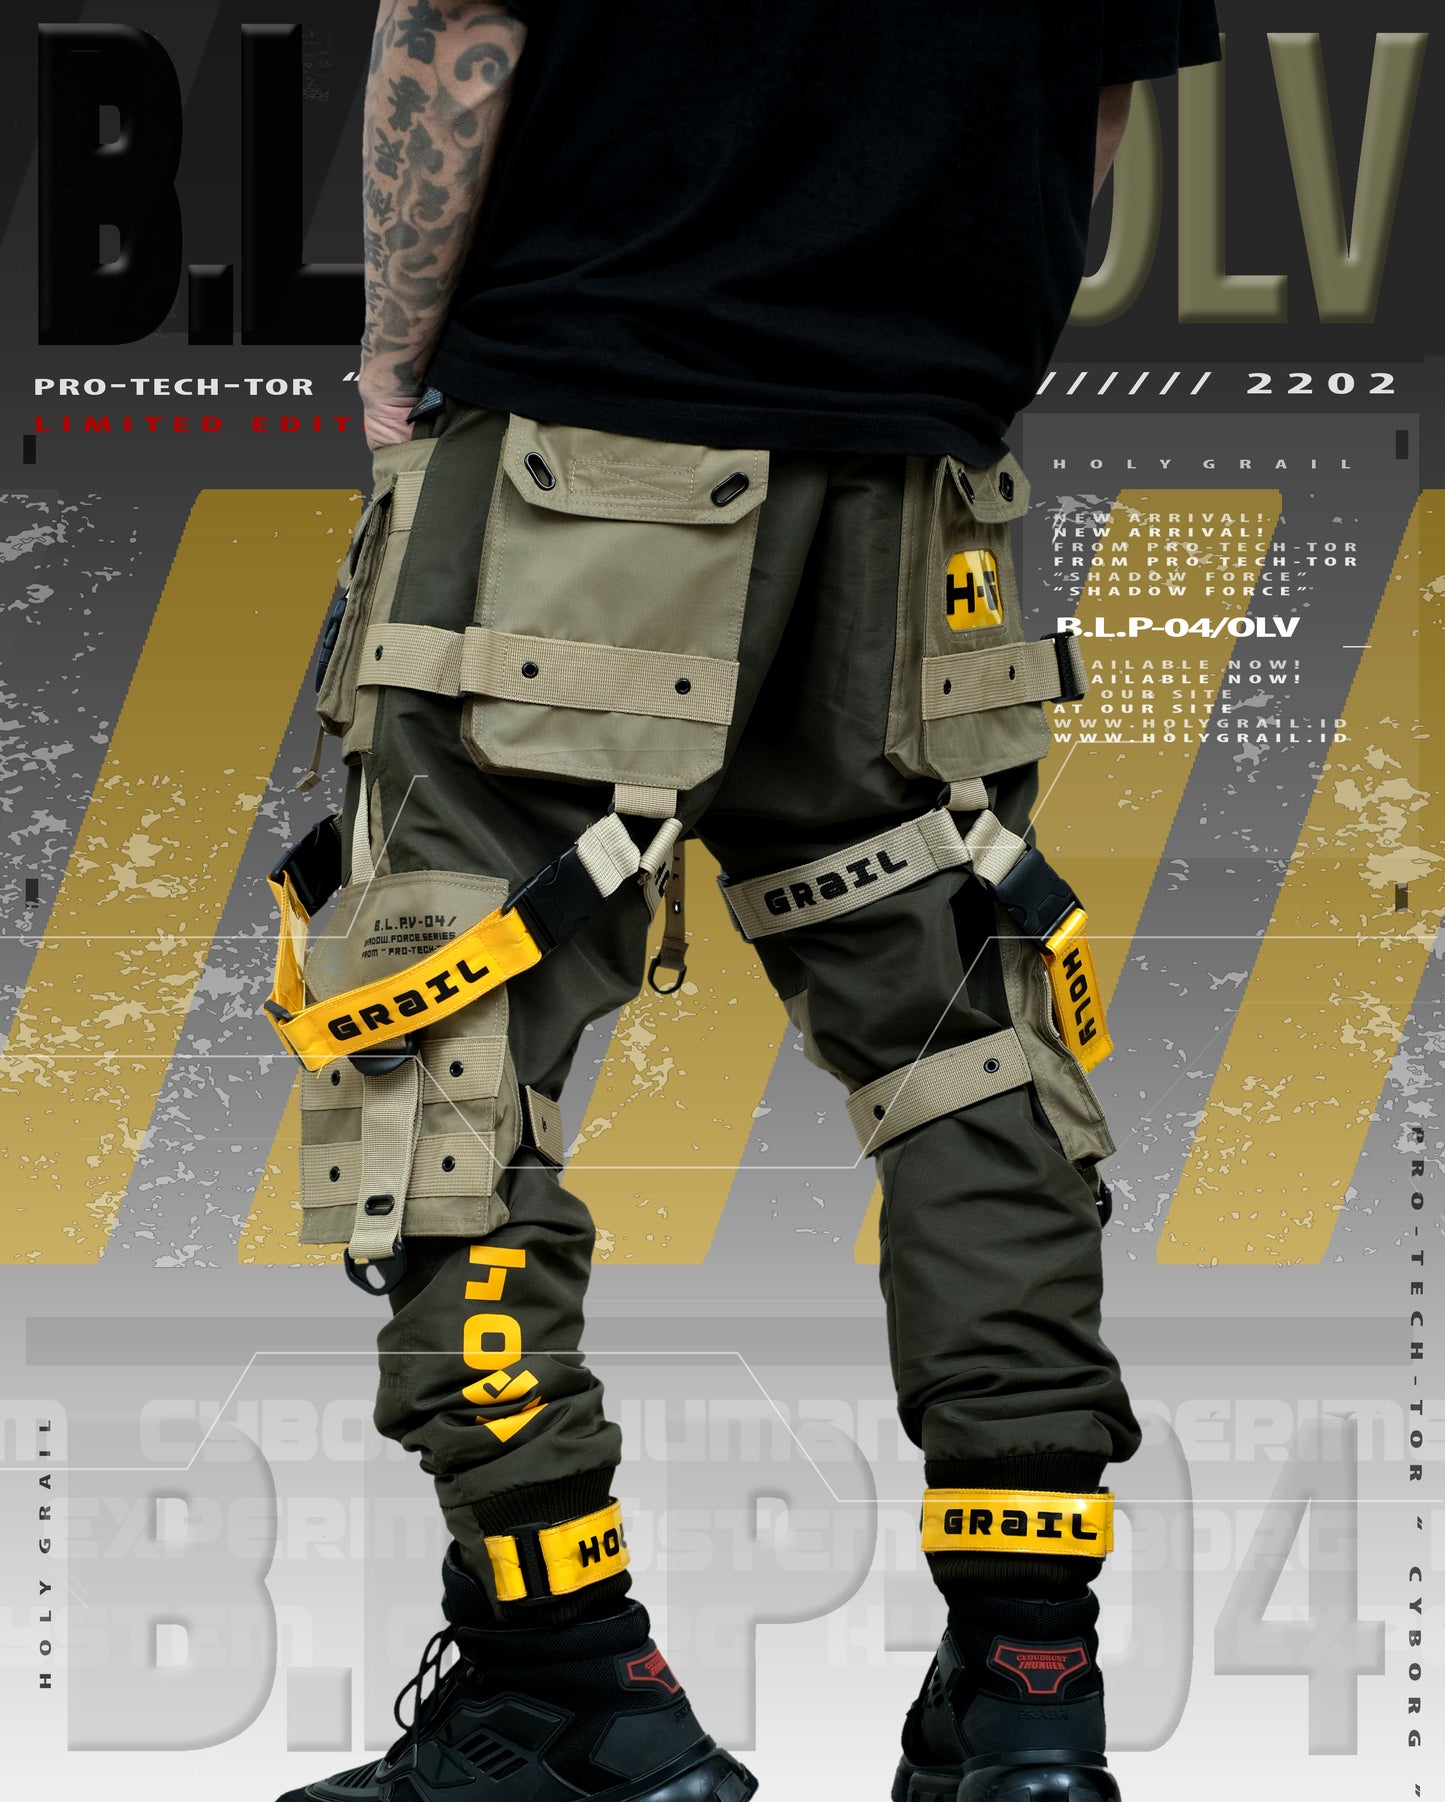 B.L.P-04/OLV (LIMITED EDITION 200 PIECES ONLY!) SOLD OUT!